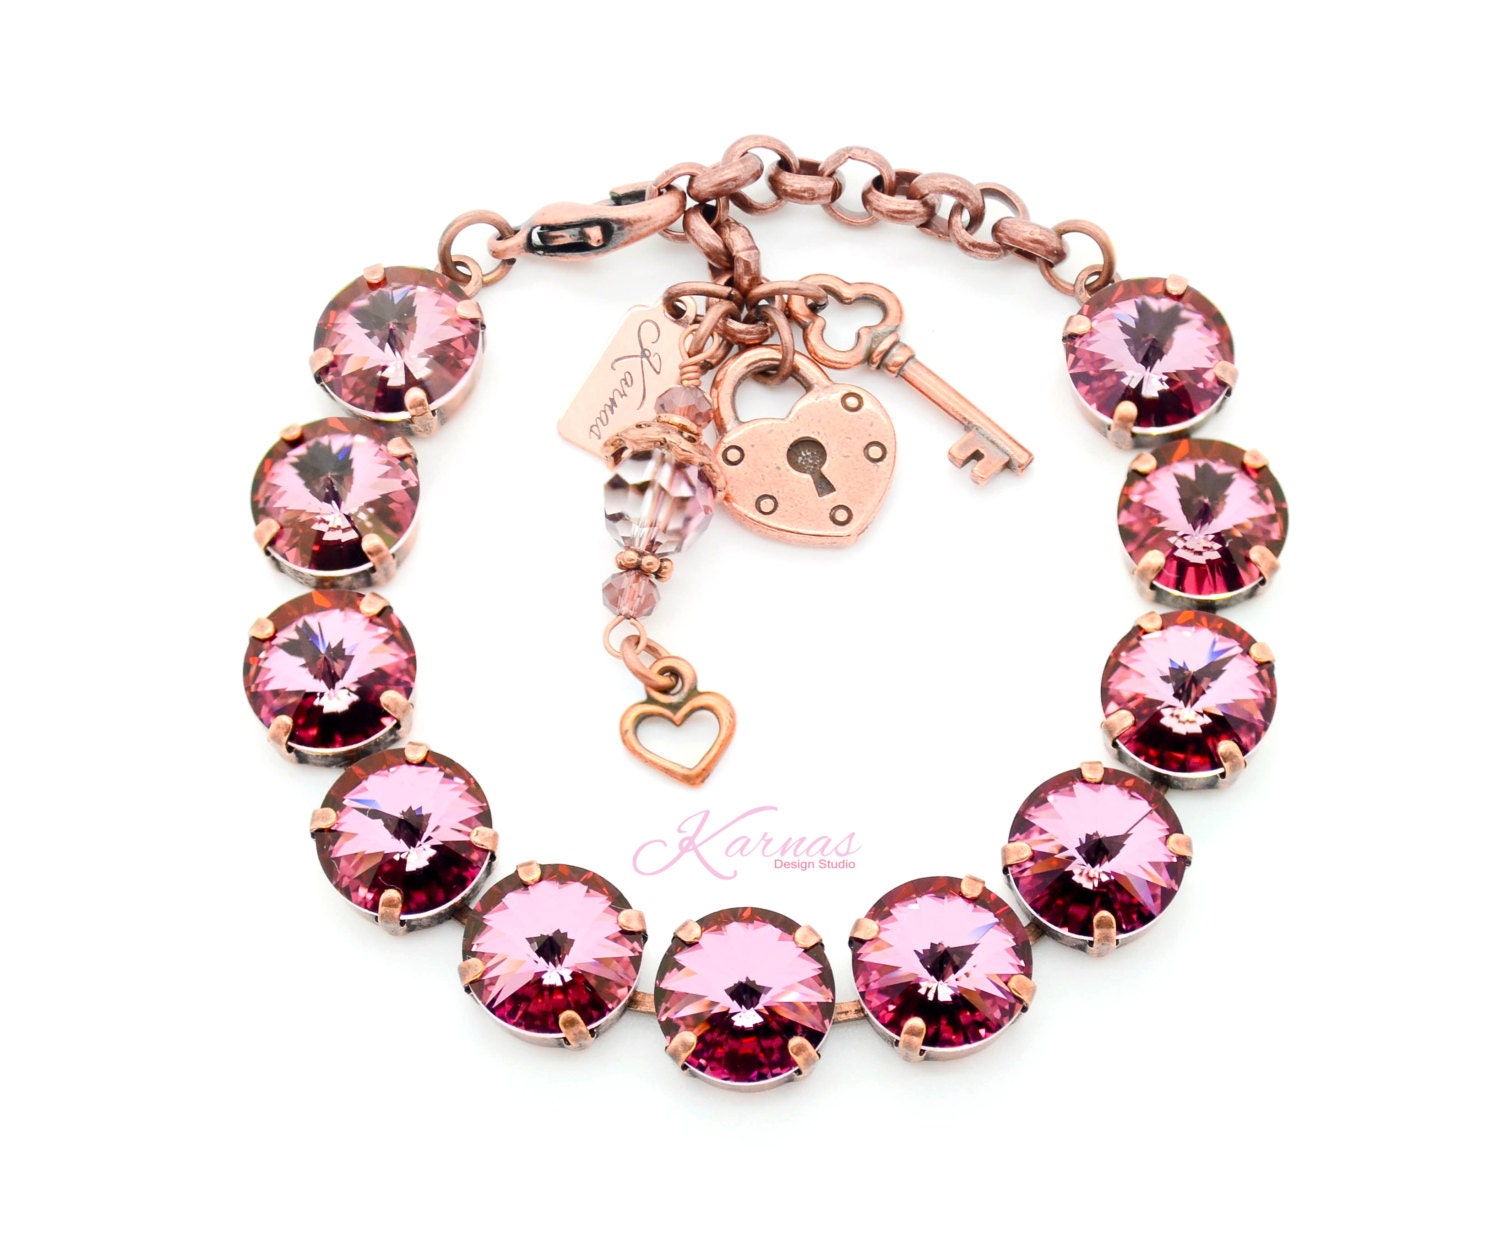 Antique Pink 12mm Charm Bracelet Made With K.d.s. Premium Crystal Choose Your Finish Karnas Design Studio Free Shipping